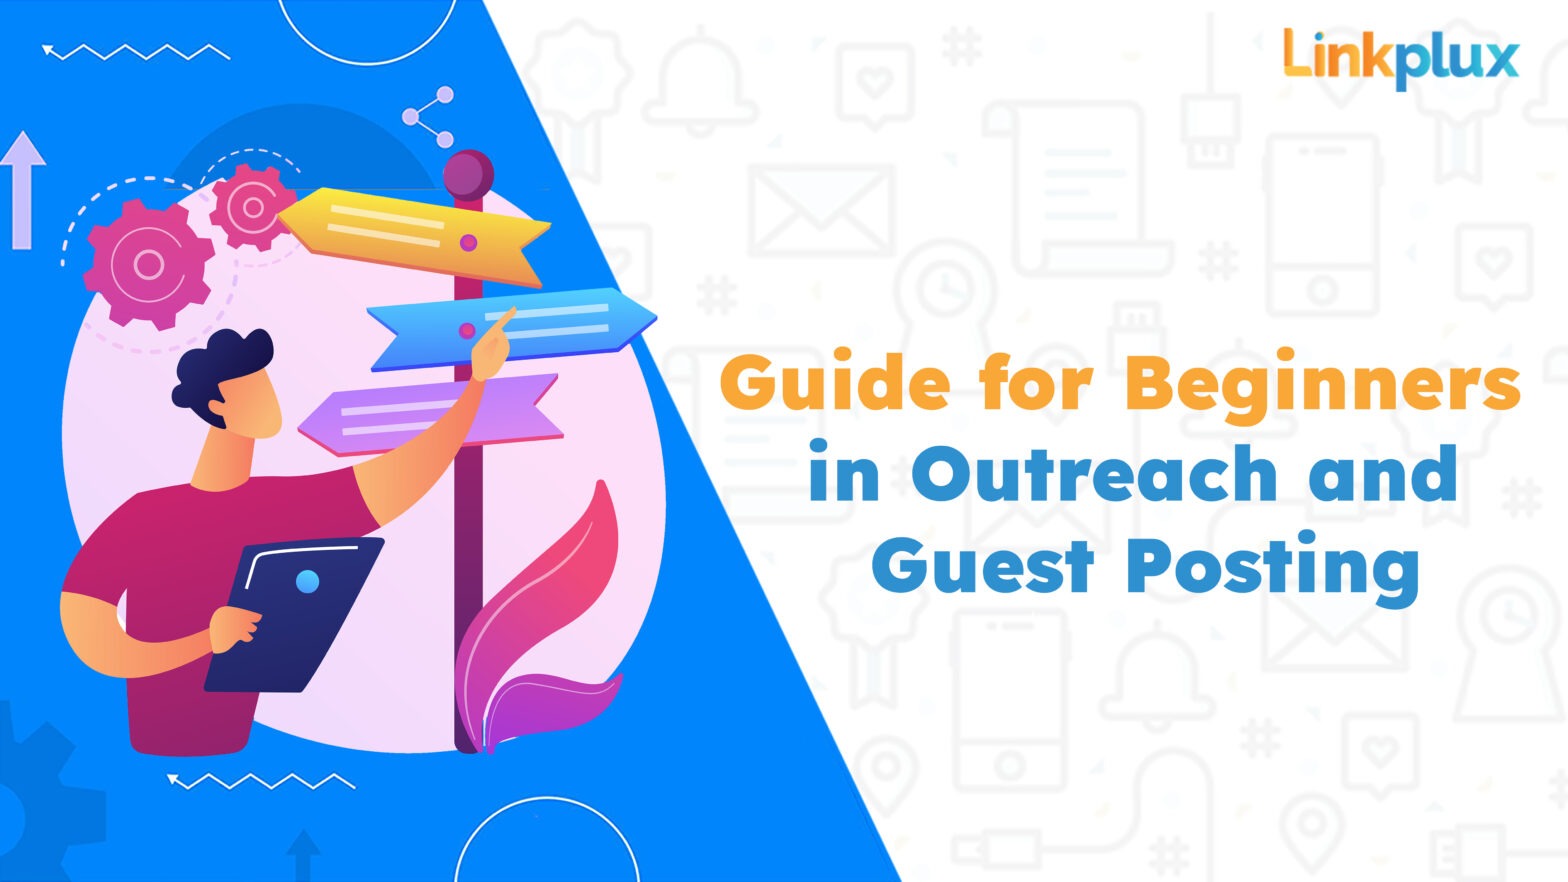 Outreach and guest posting